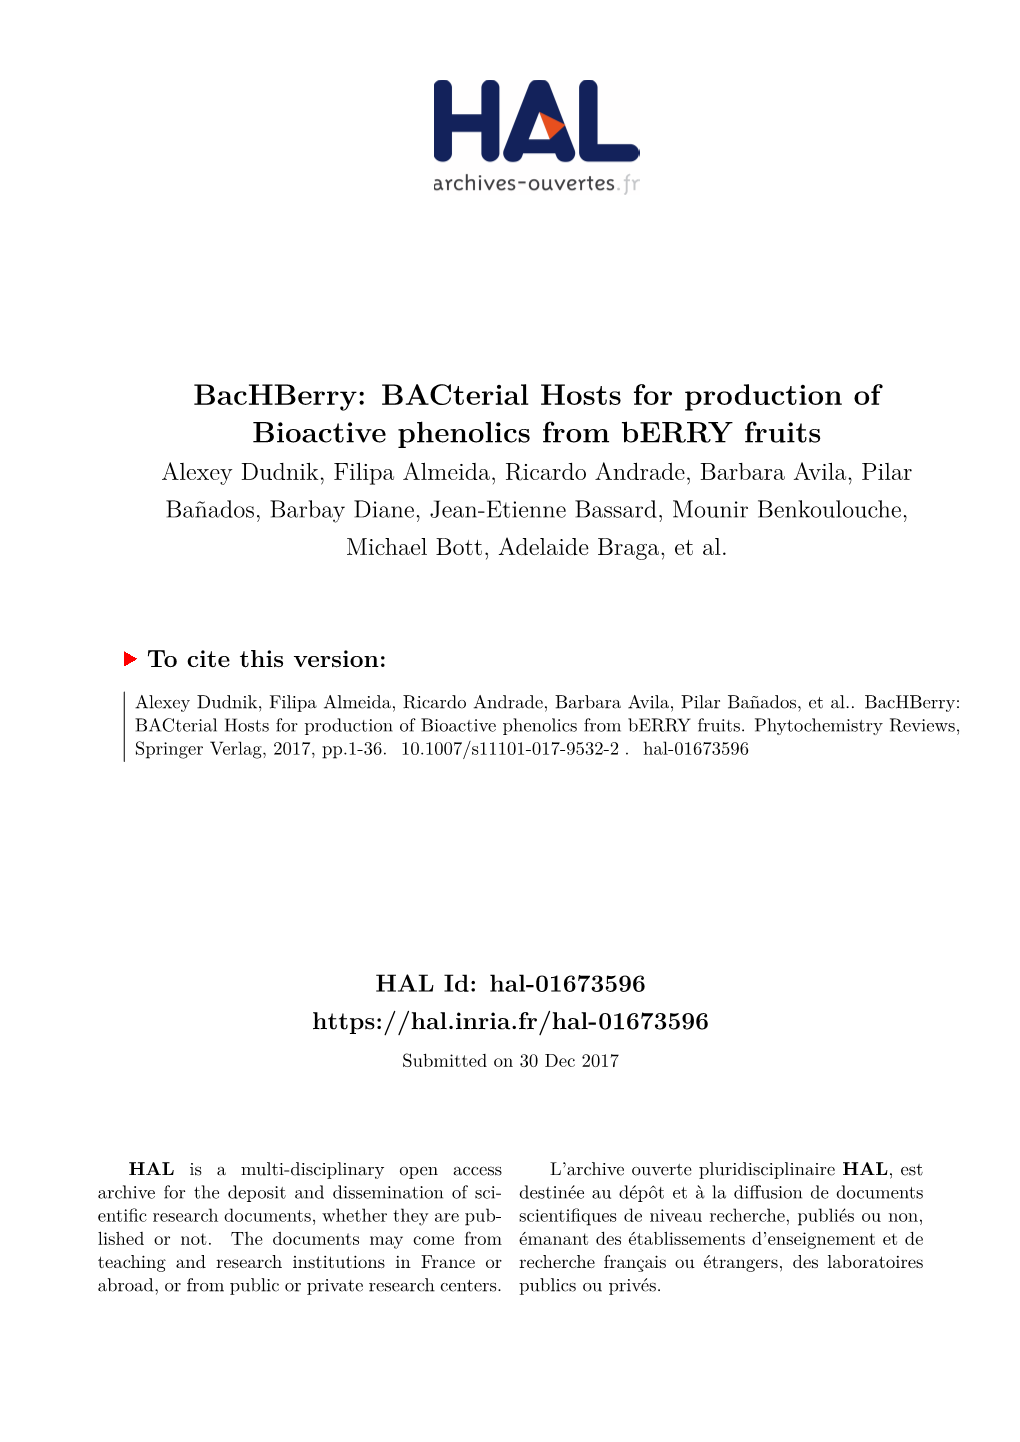 Bacterial Hosts for Production of Bioactive Phenolics From